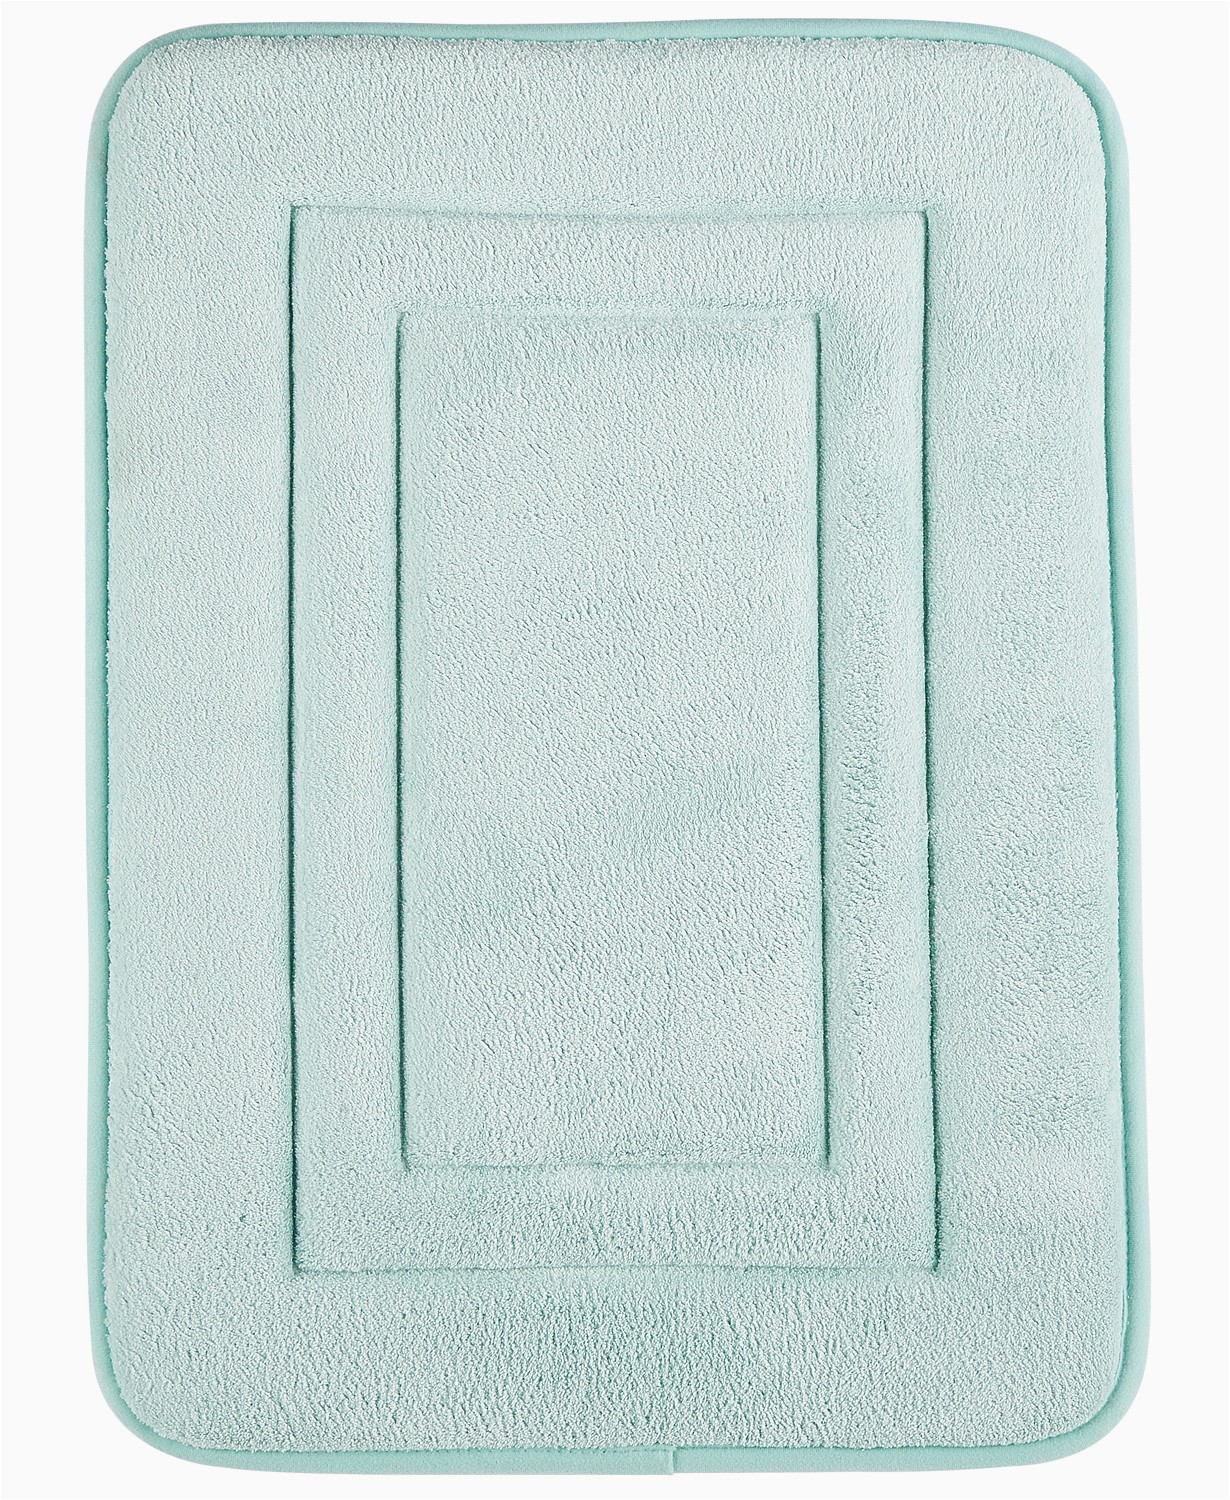 Sunham Home Fashions Bath Rug Sunham Inspire Plus Bath Rug Features Unique 3d Fiber Structure Brings Stylish and Functional Flair to Your Décor 17 Inch by 24 Inch Spa Blue